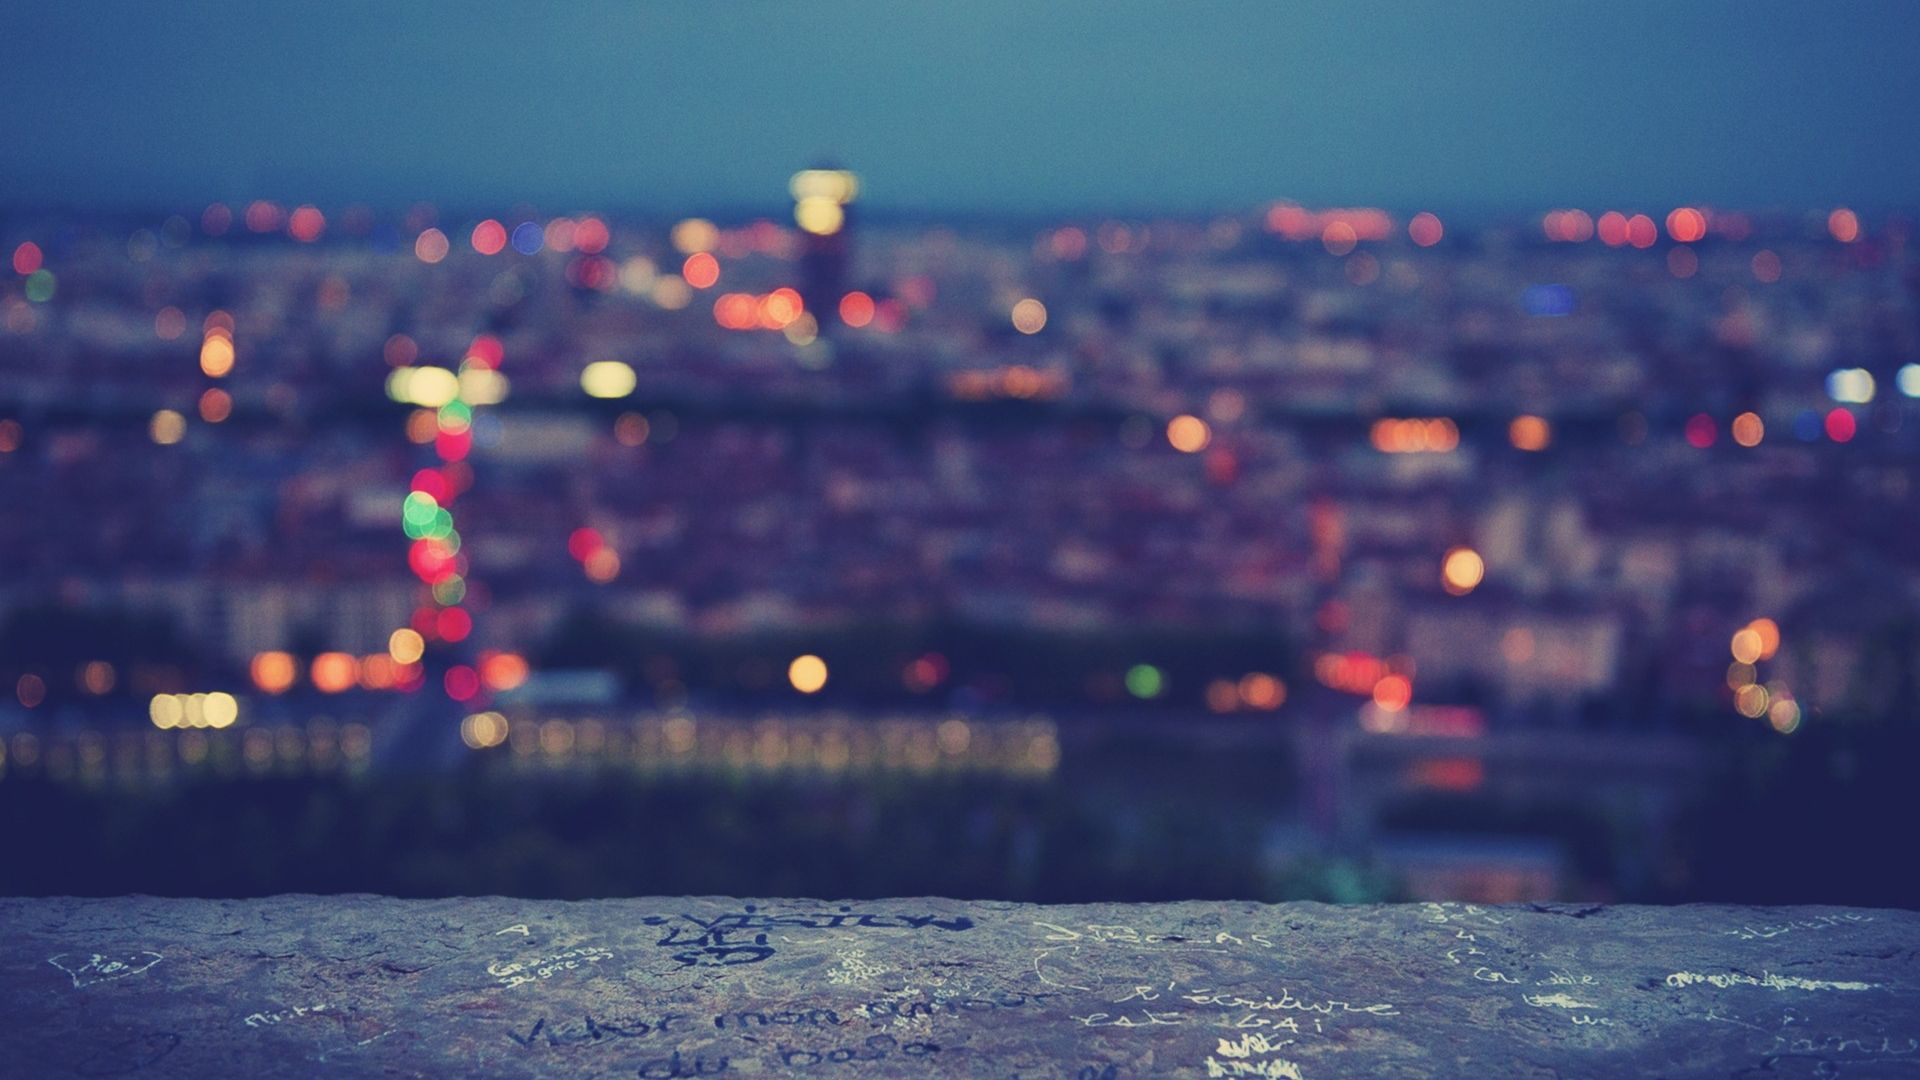 Free download Blurred City Lights Background Tumblr Blurred City